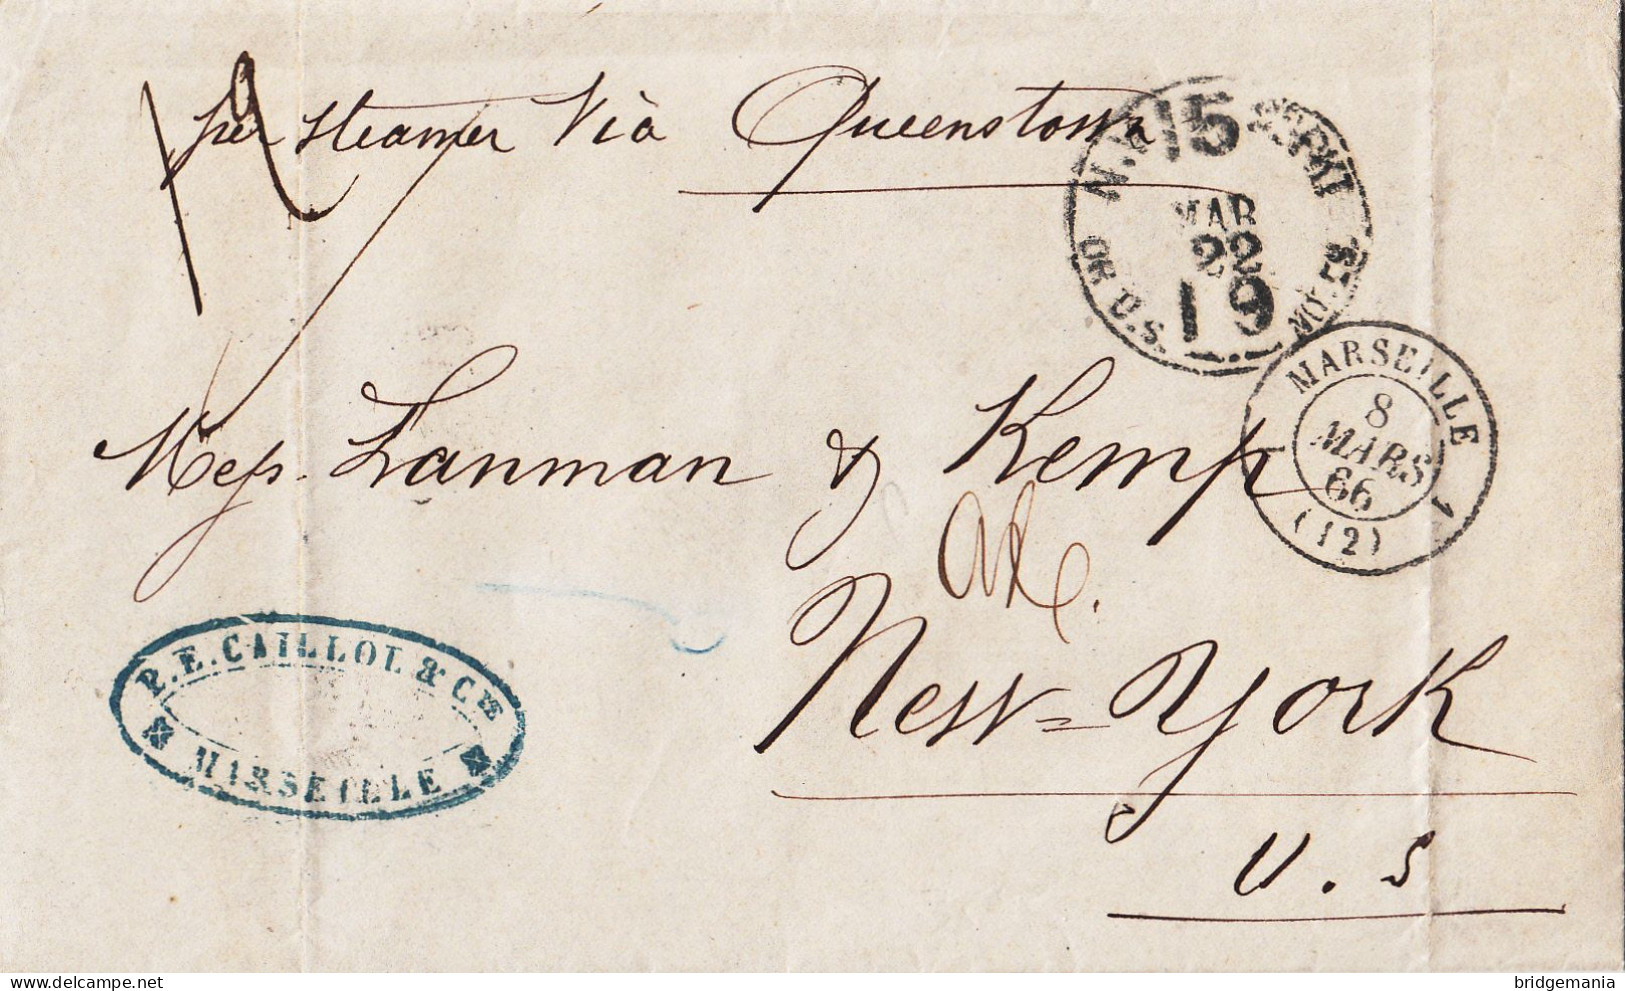 MTM146 - 1866 TRANSATLANTIC LETTER FRANCE TO USA Steamer AUSTRALASIA CUNARD - UNPAID - DEPRECIATED CURRENCY - Marcophilie